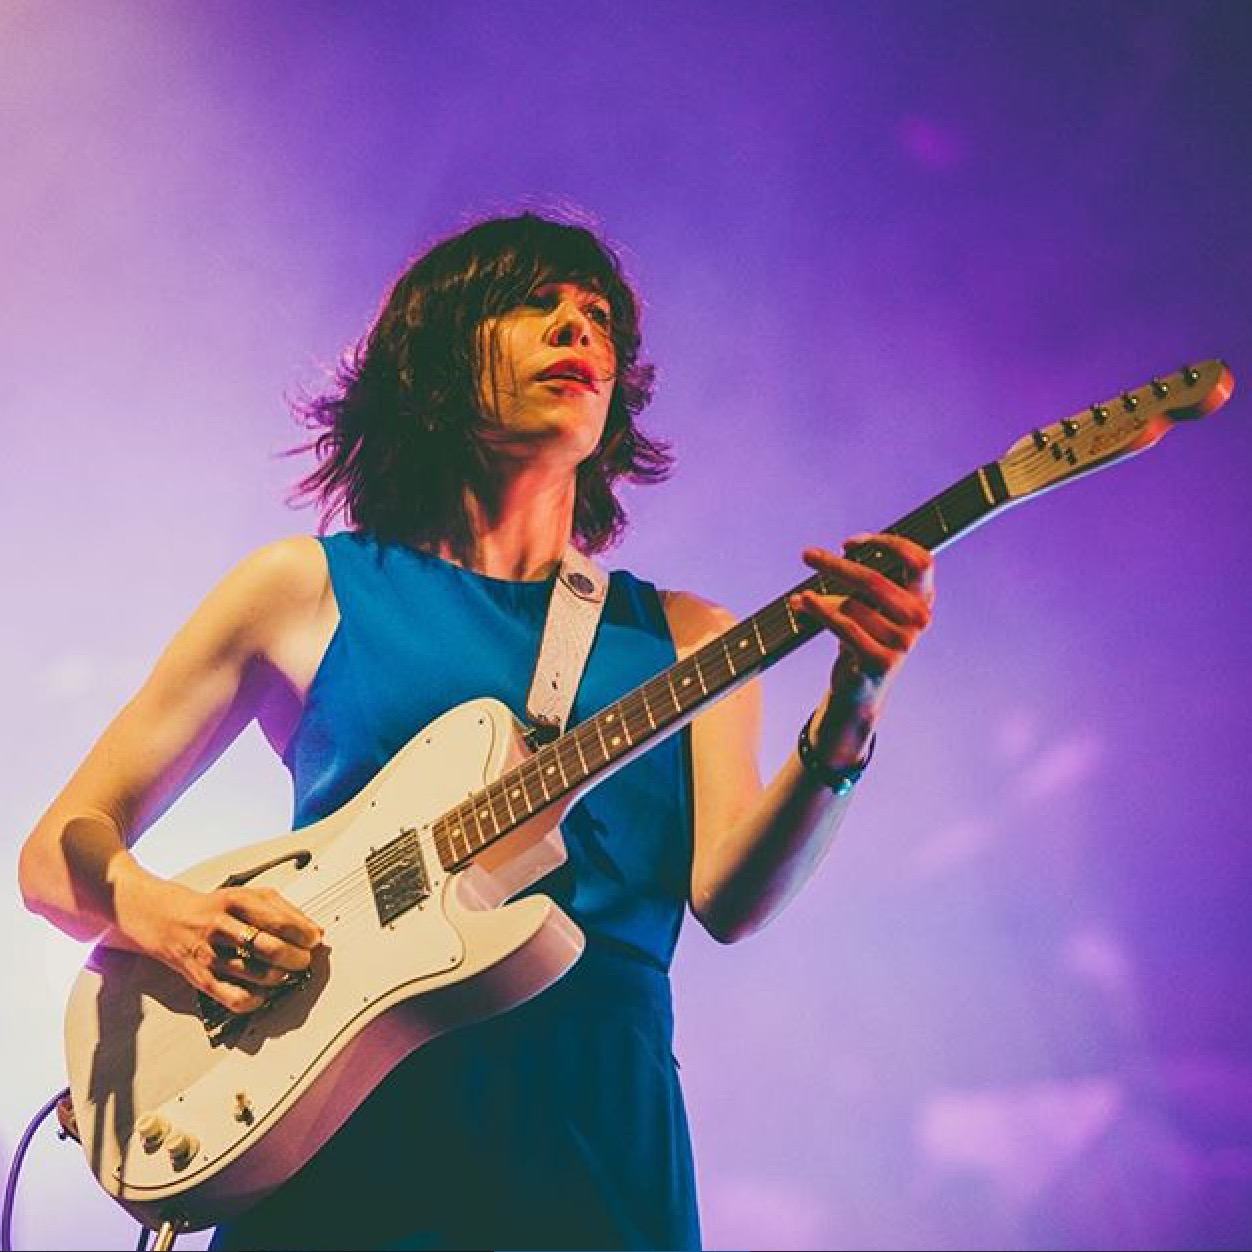 Carrie Brownstein of Sleater Kinney (and Portlandia!)